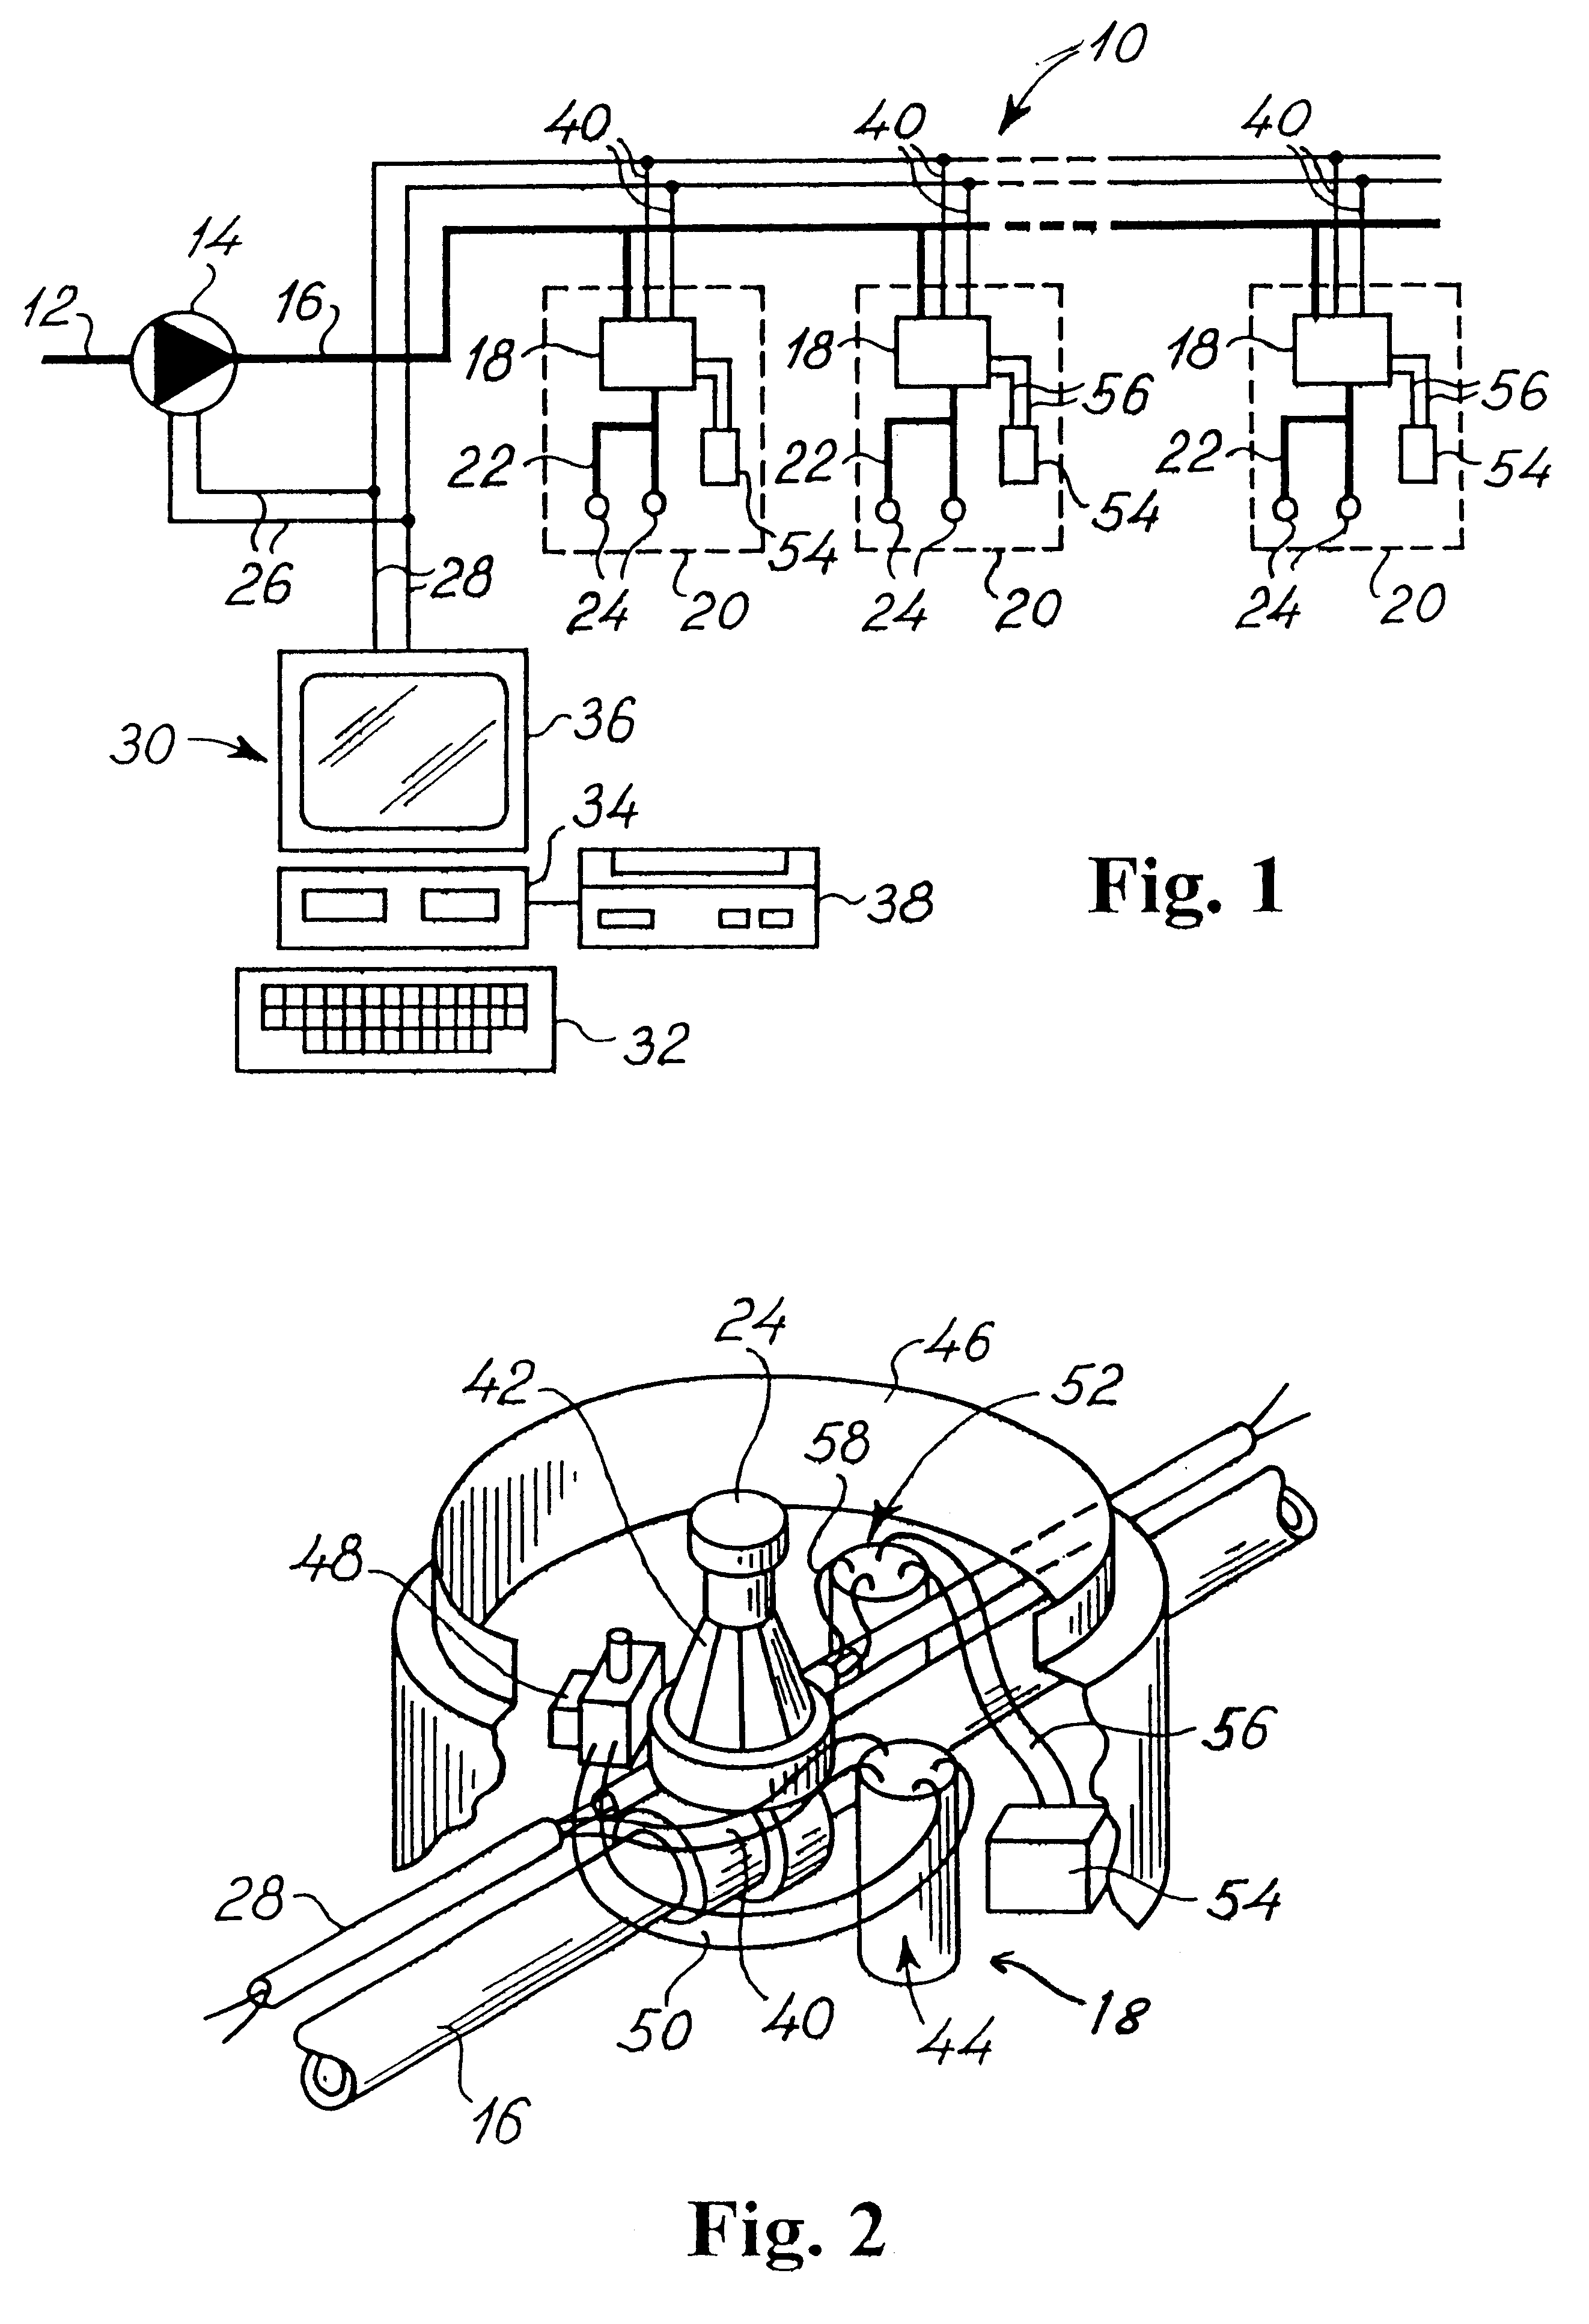 Two-wire controlling and monitoring system for irrigation of localized areas of soil